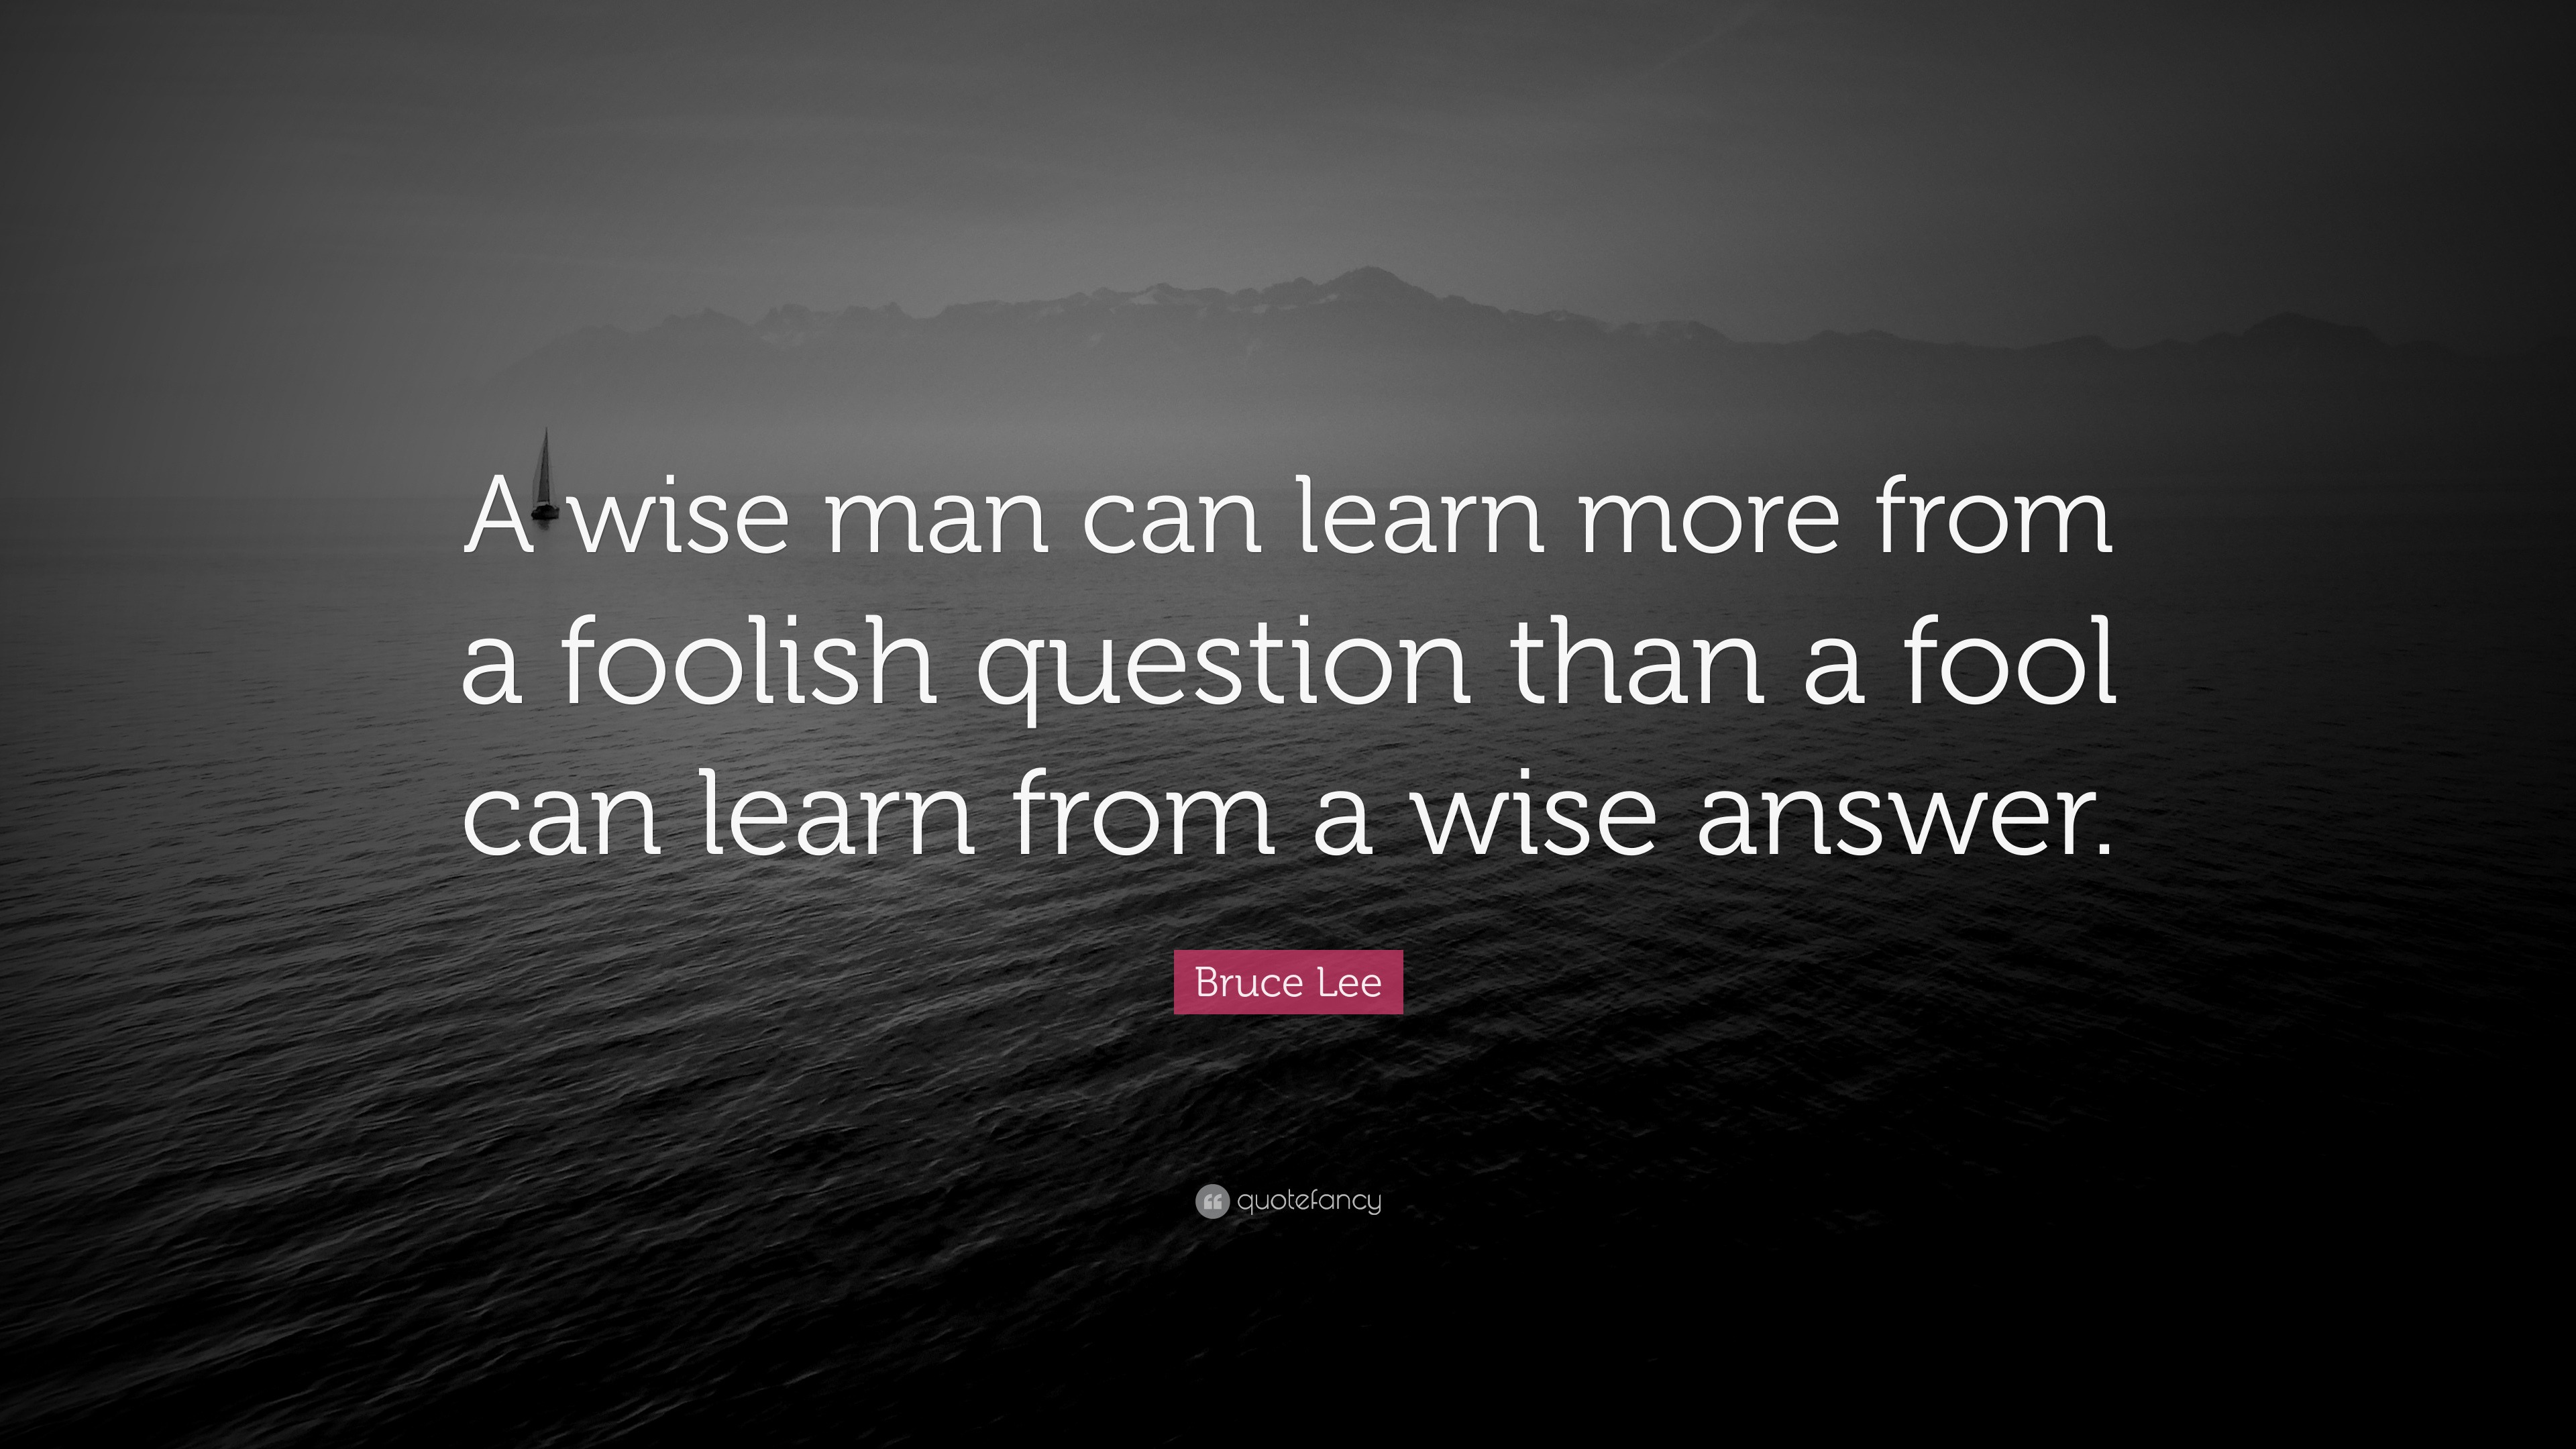 Bruce Lee Quote: "A wise man can learn more from a foolish ...